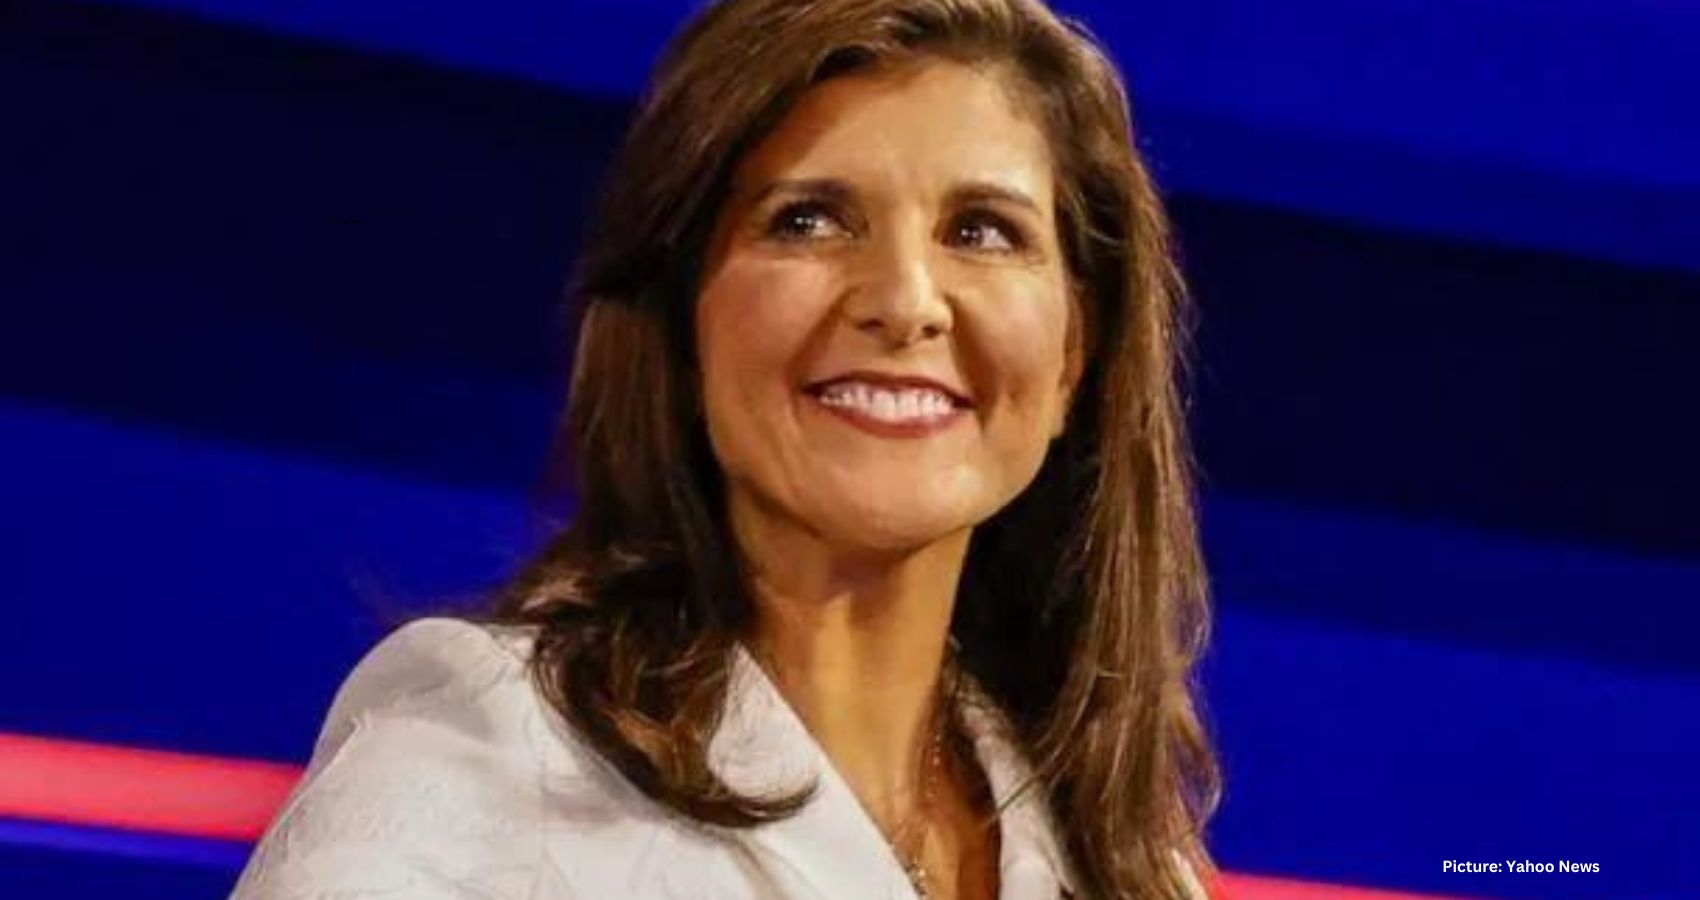 Americans for Prosperity Action Endorses Nikki Haley as Republican Alternative to Trump in 2024, Shifting Dynamics in GOP Primary Race